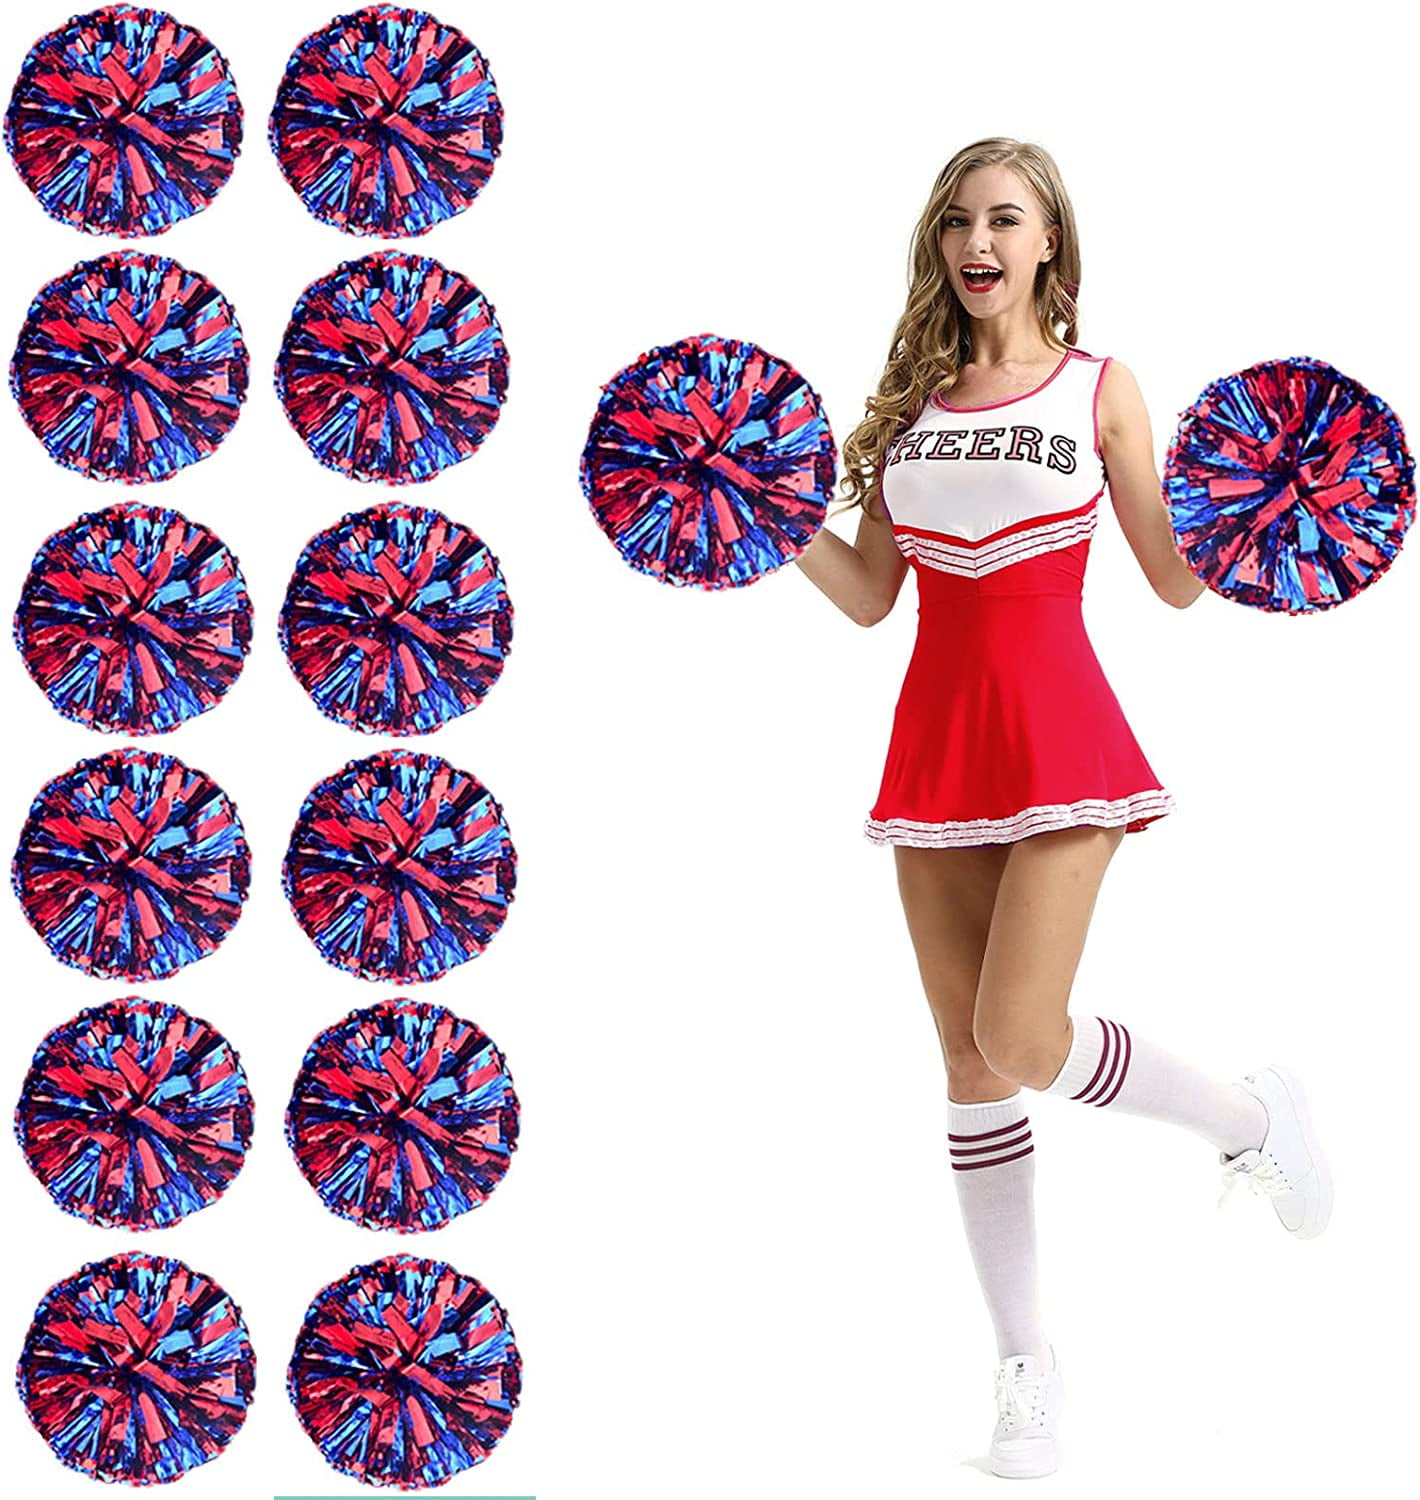 48X Cheerleading Pom Poms Metallic Foil Cheer Pom Poms With Plastic Handle  For Adults Kids Cheerleaders Party Red & Blue - AliExpress